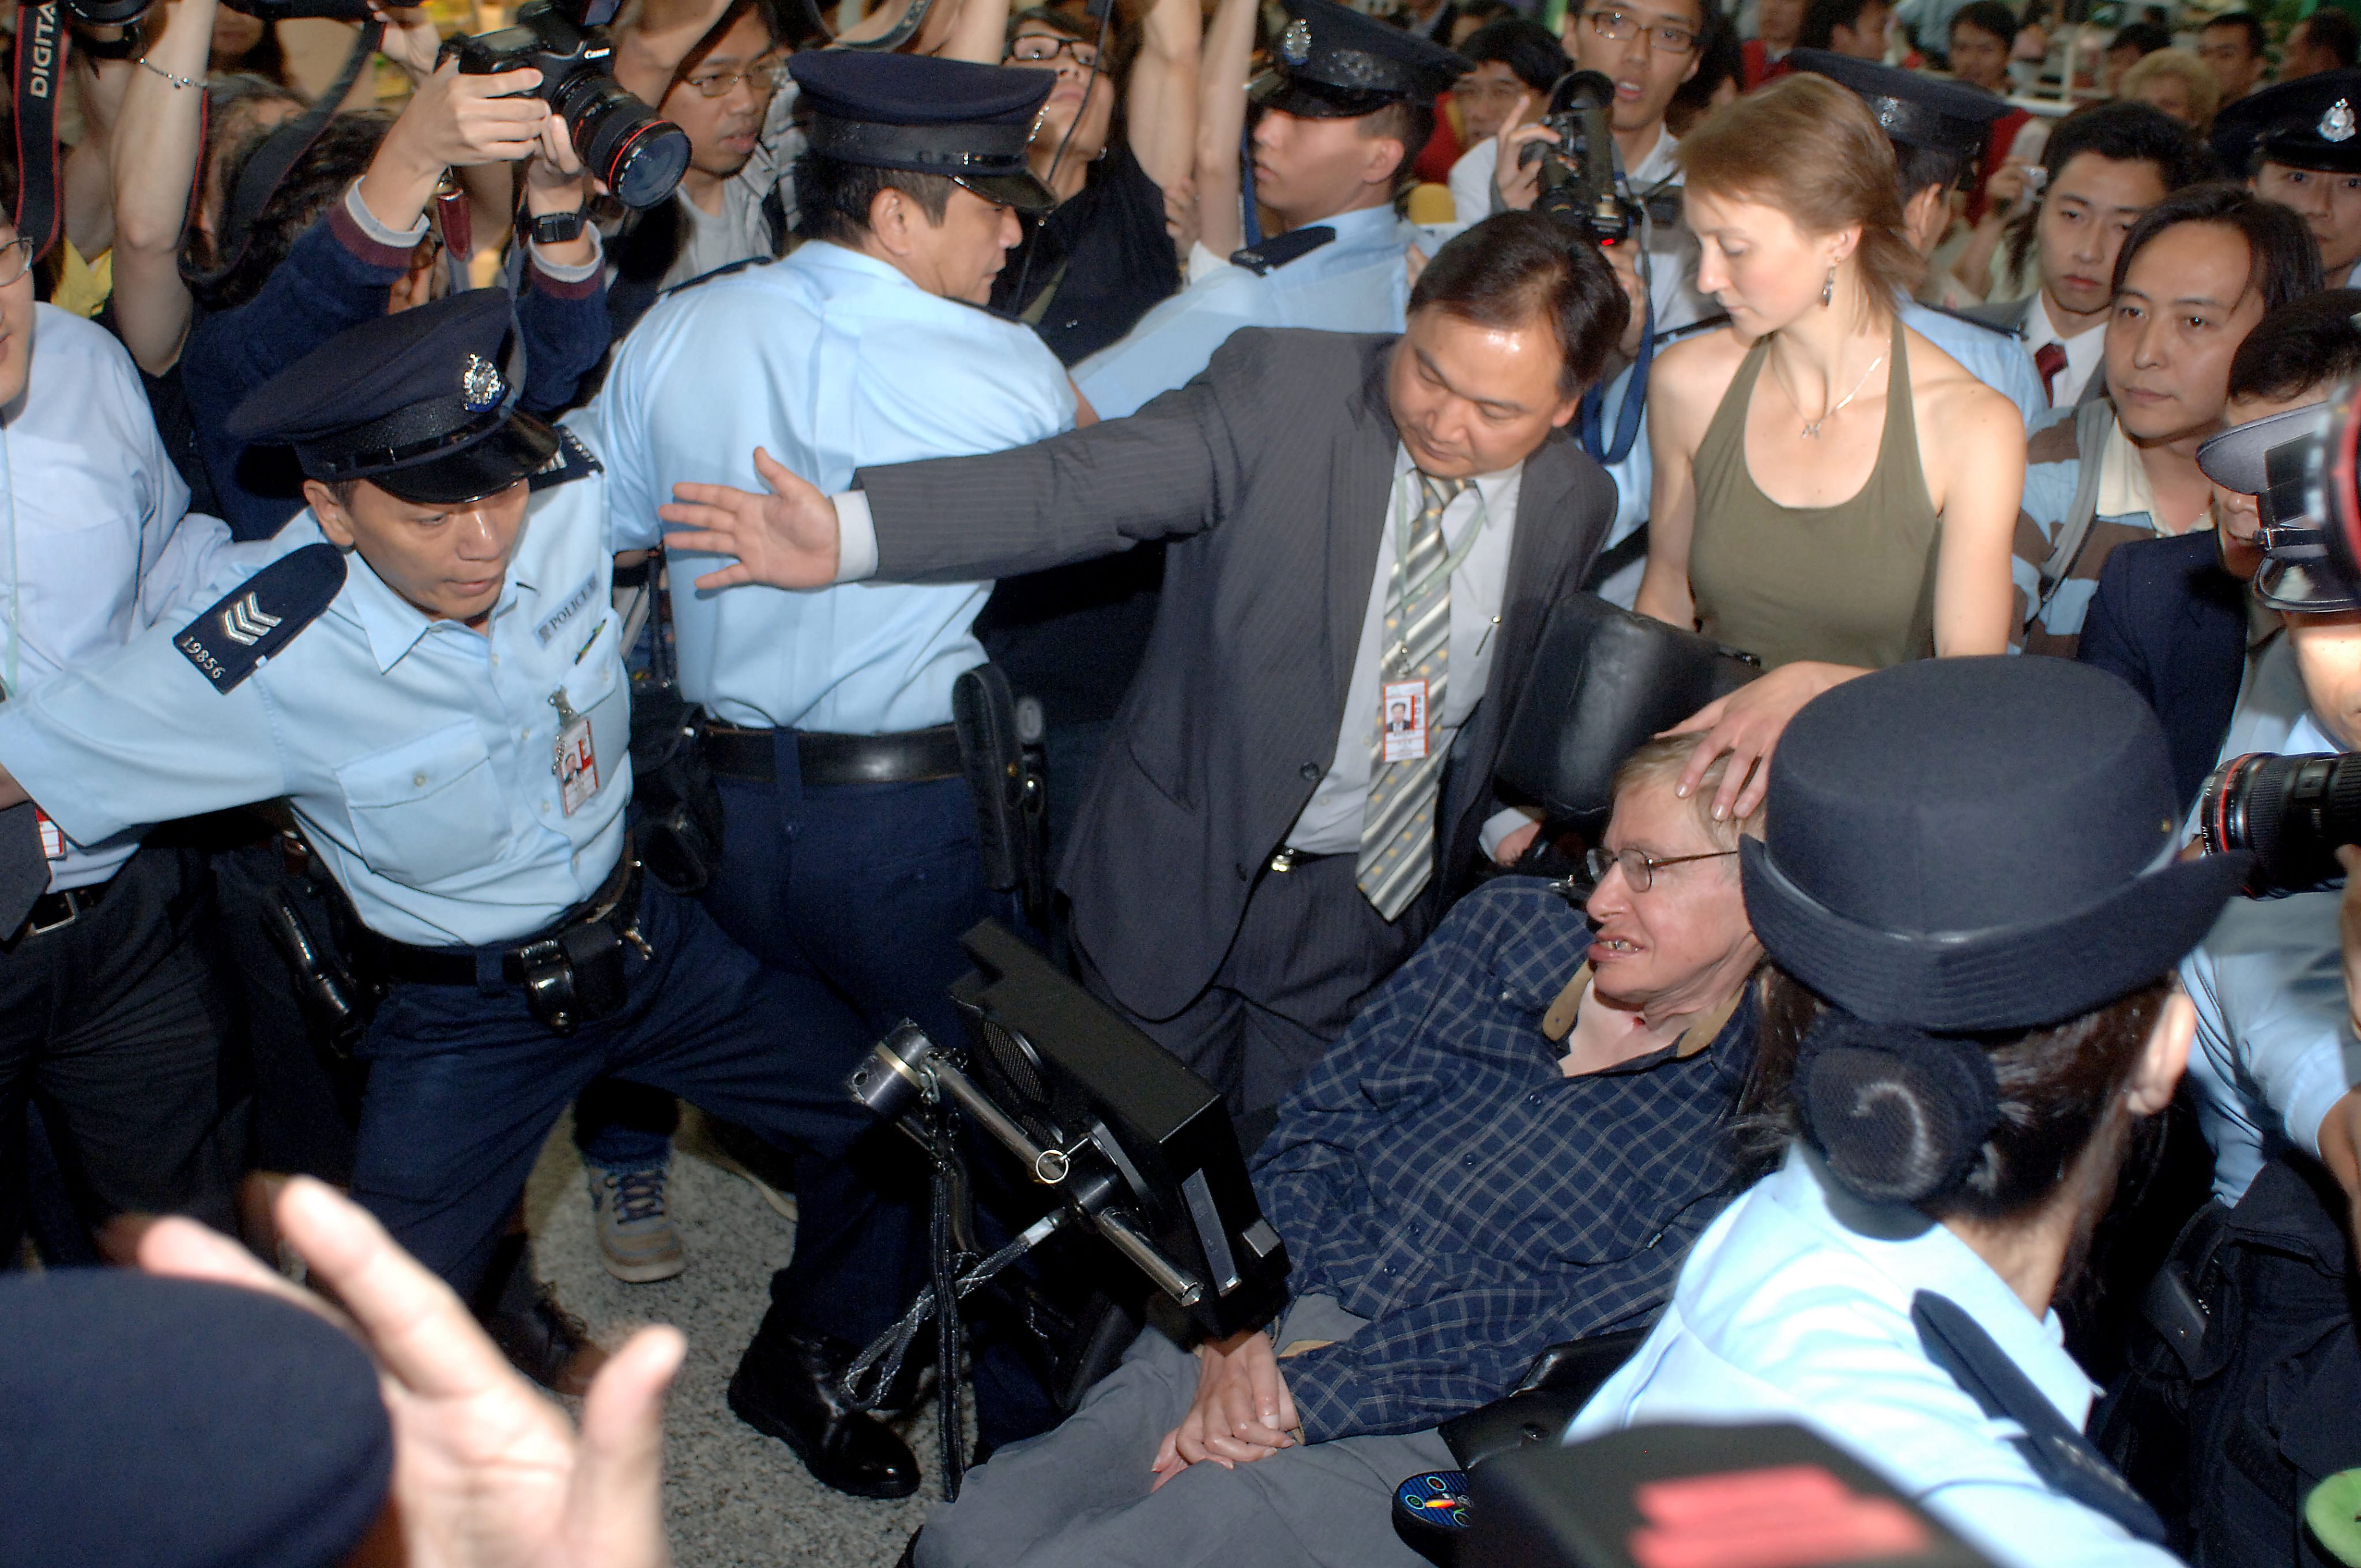 When Stephen Hawking visited Hong Kong to give a lecture in 2006, he was mobbed at Hong Kong International Airport. Photo: SCMP